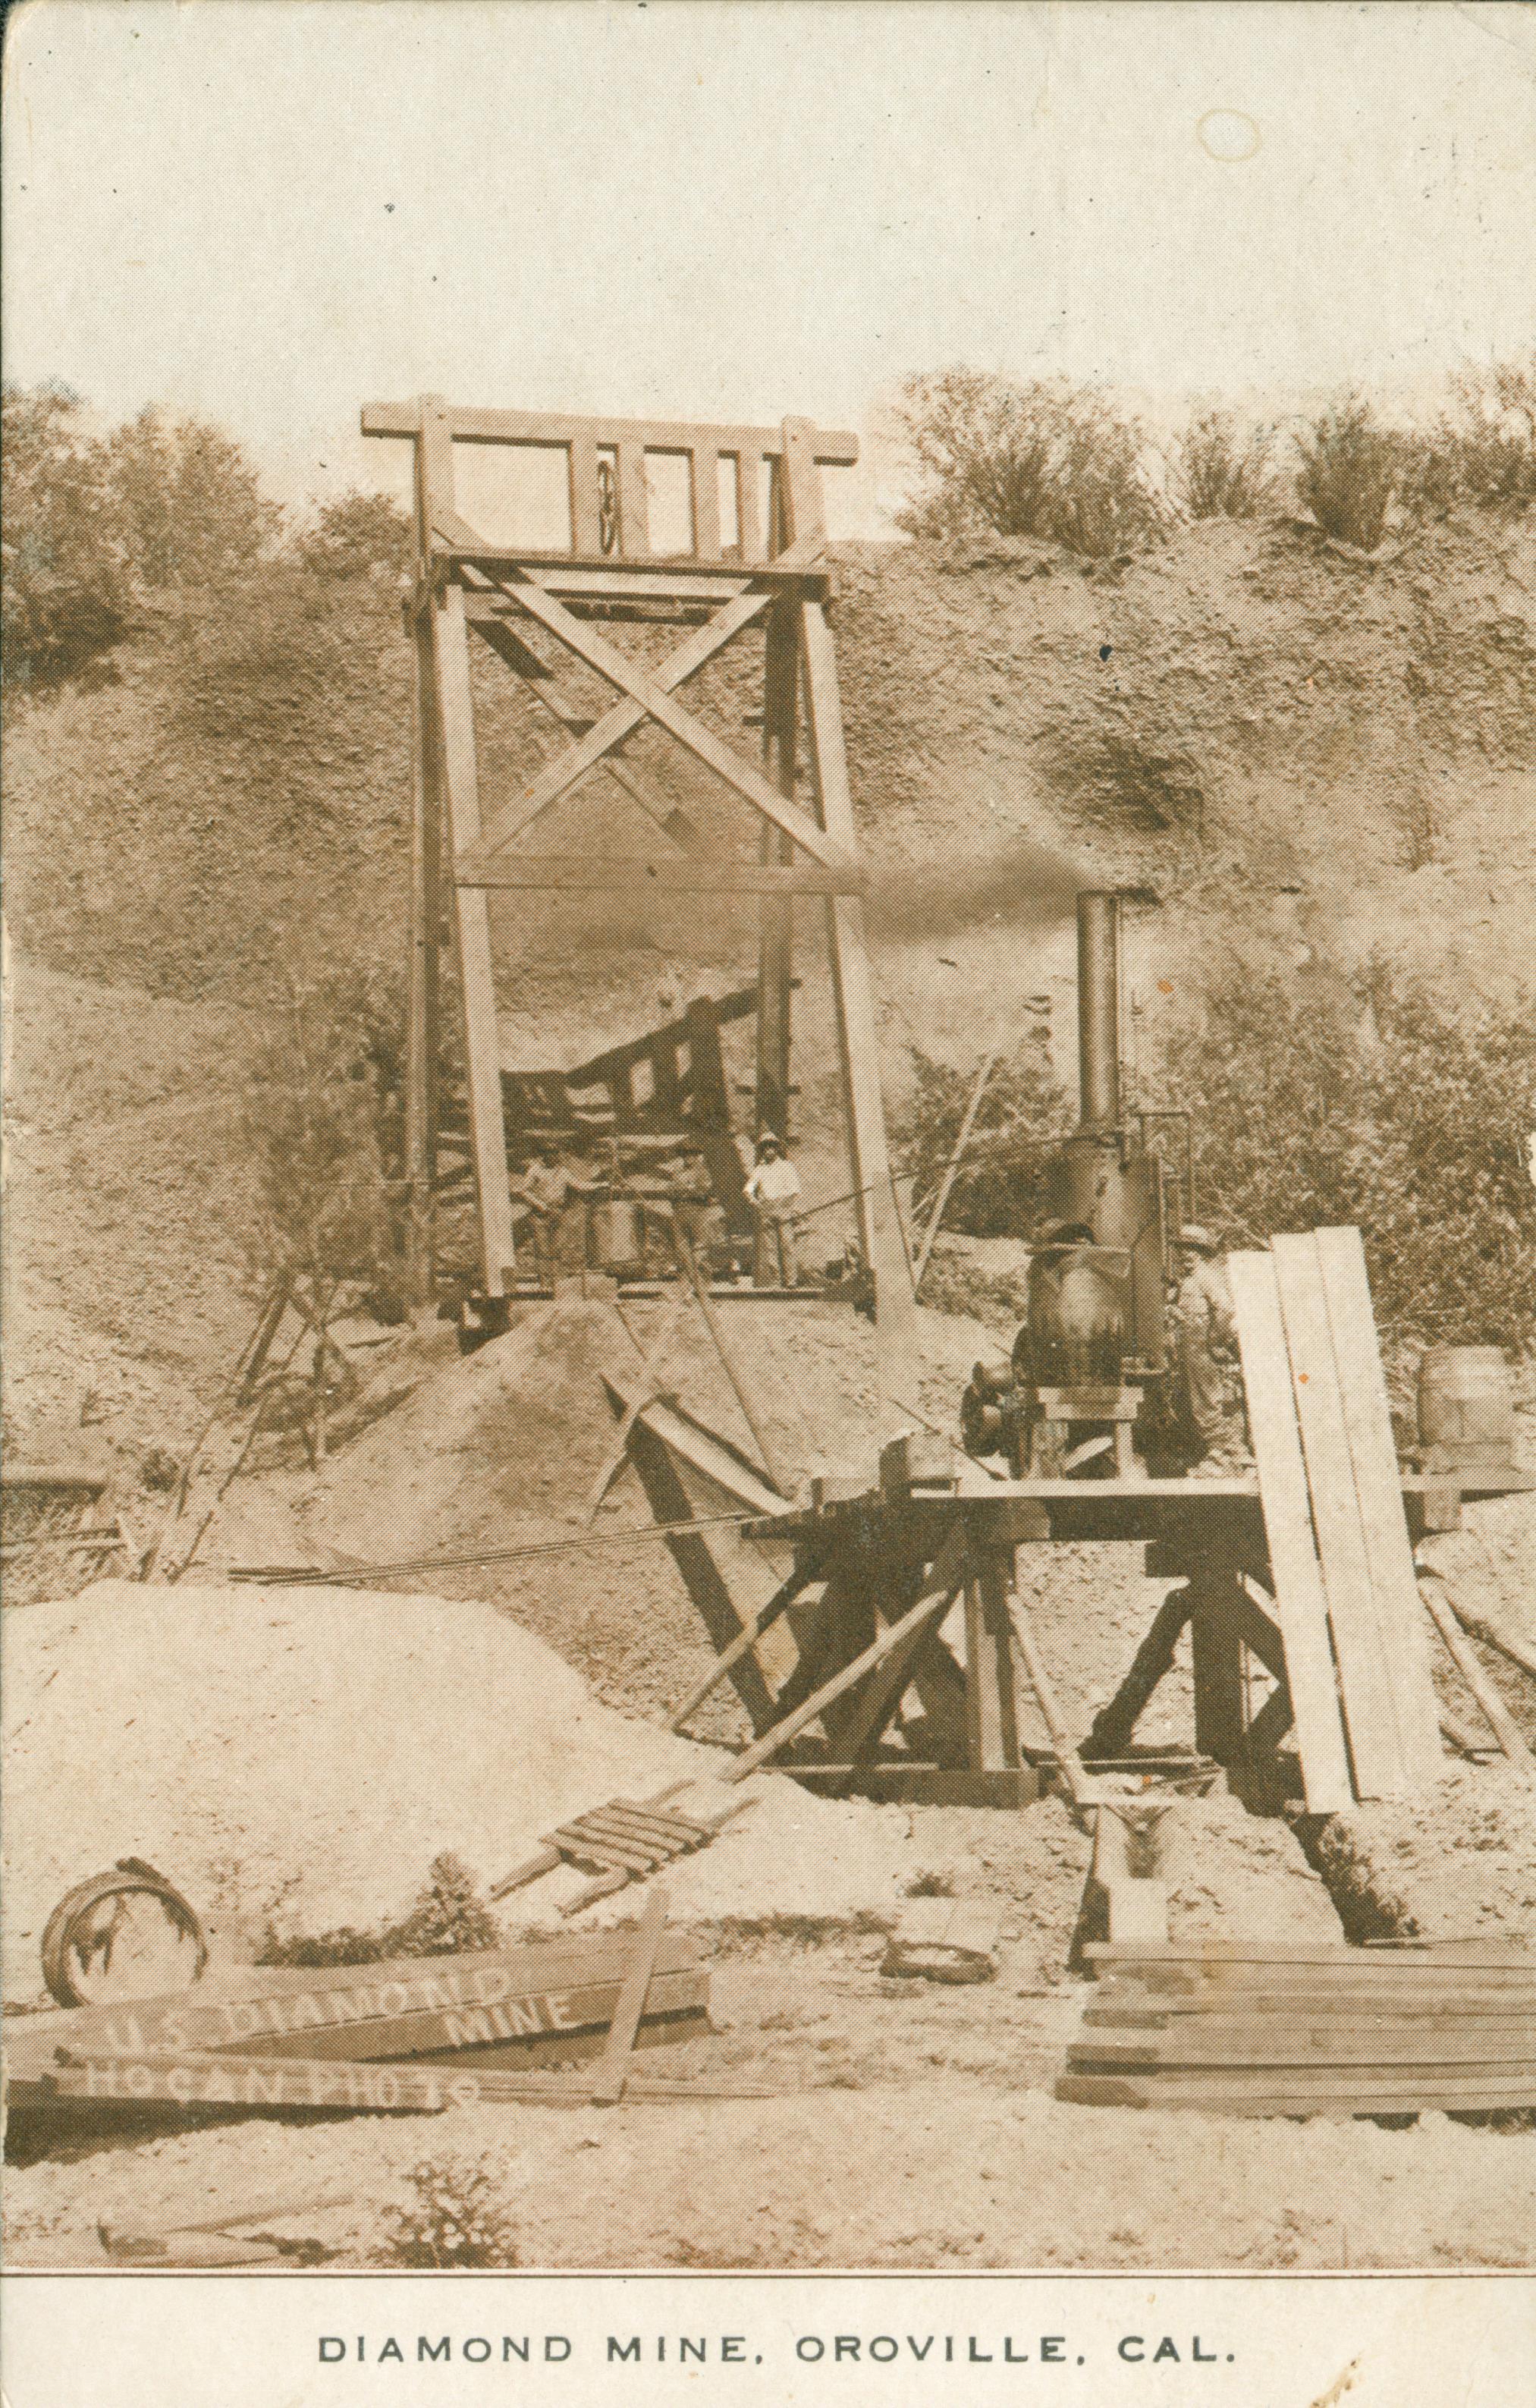 Shows the exterior of the Diamond Mine